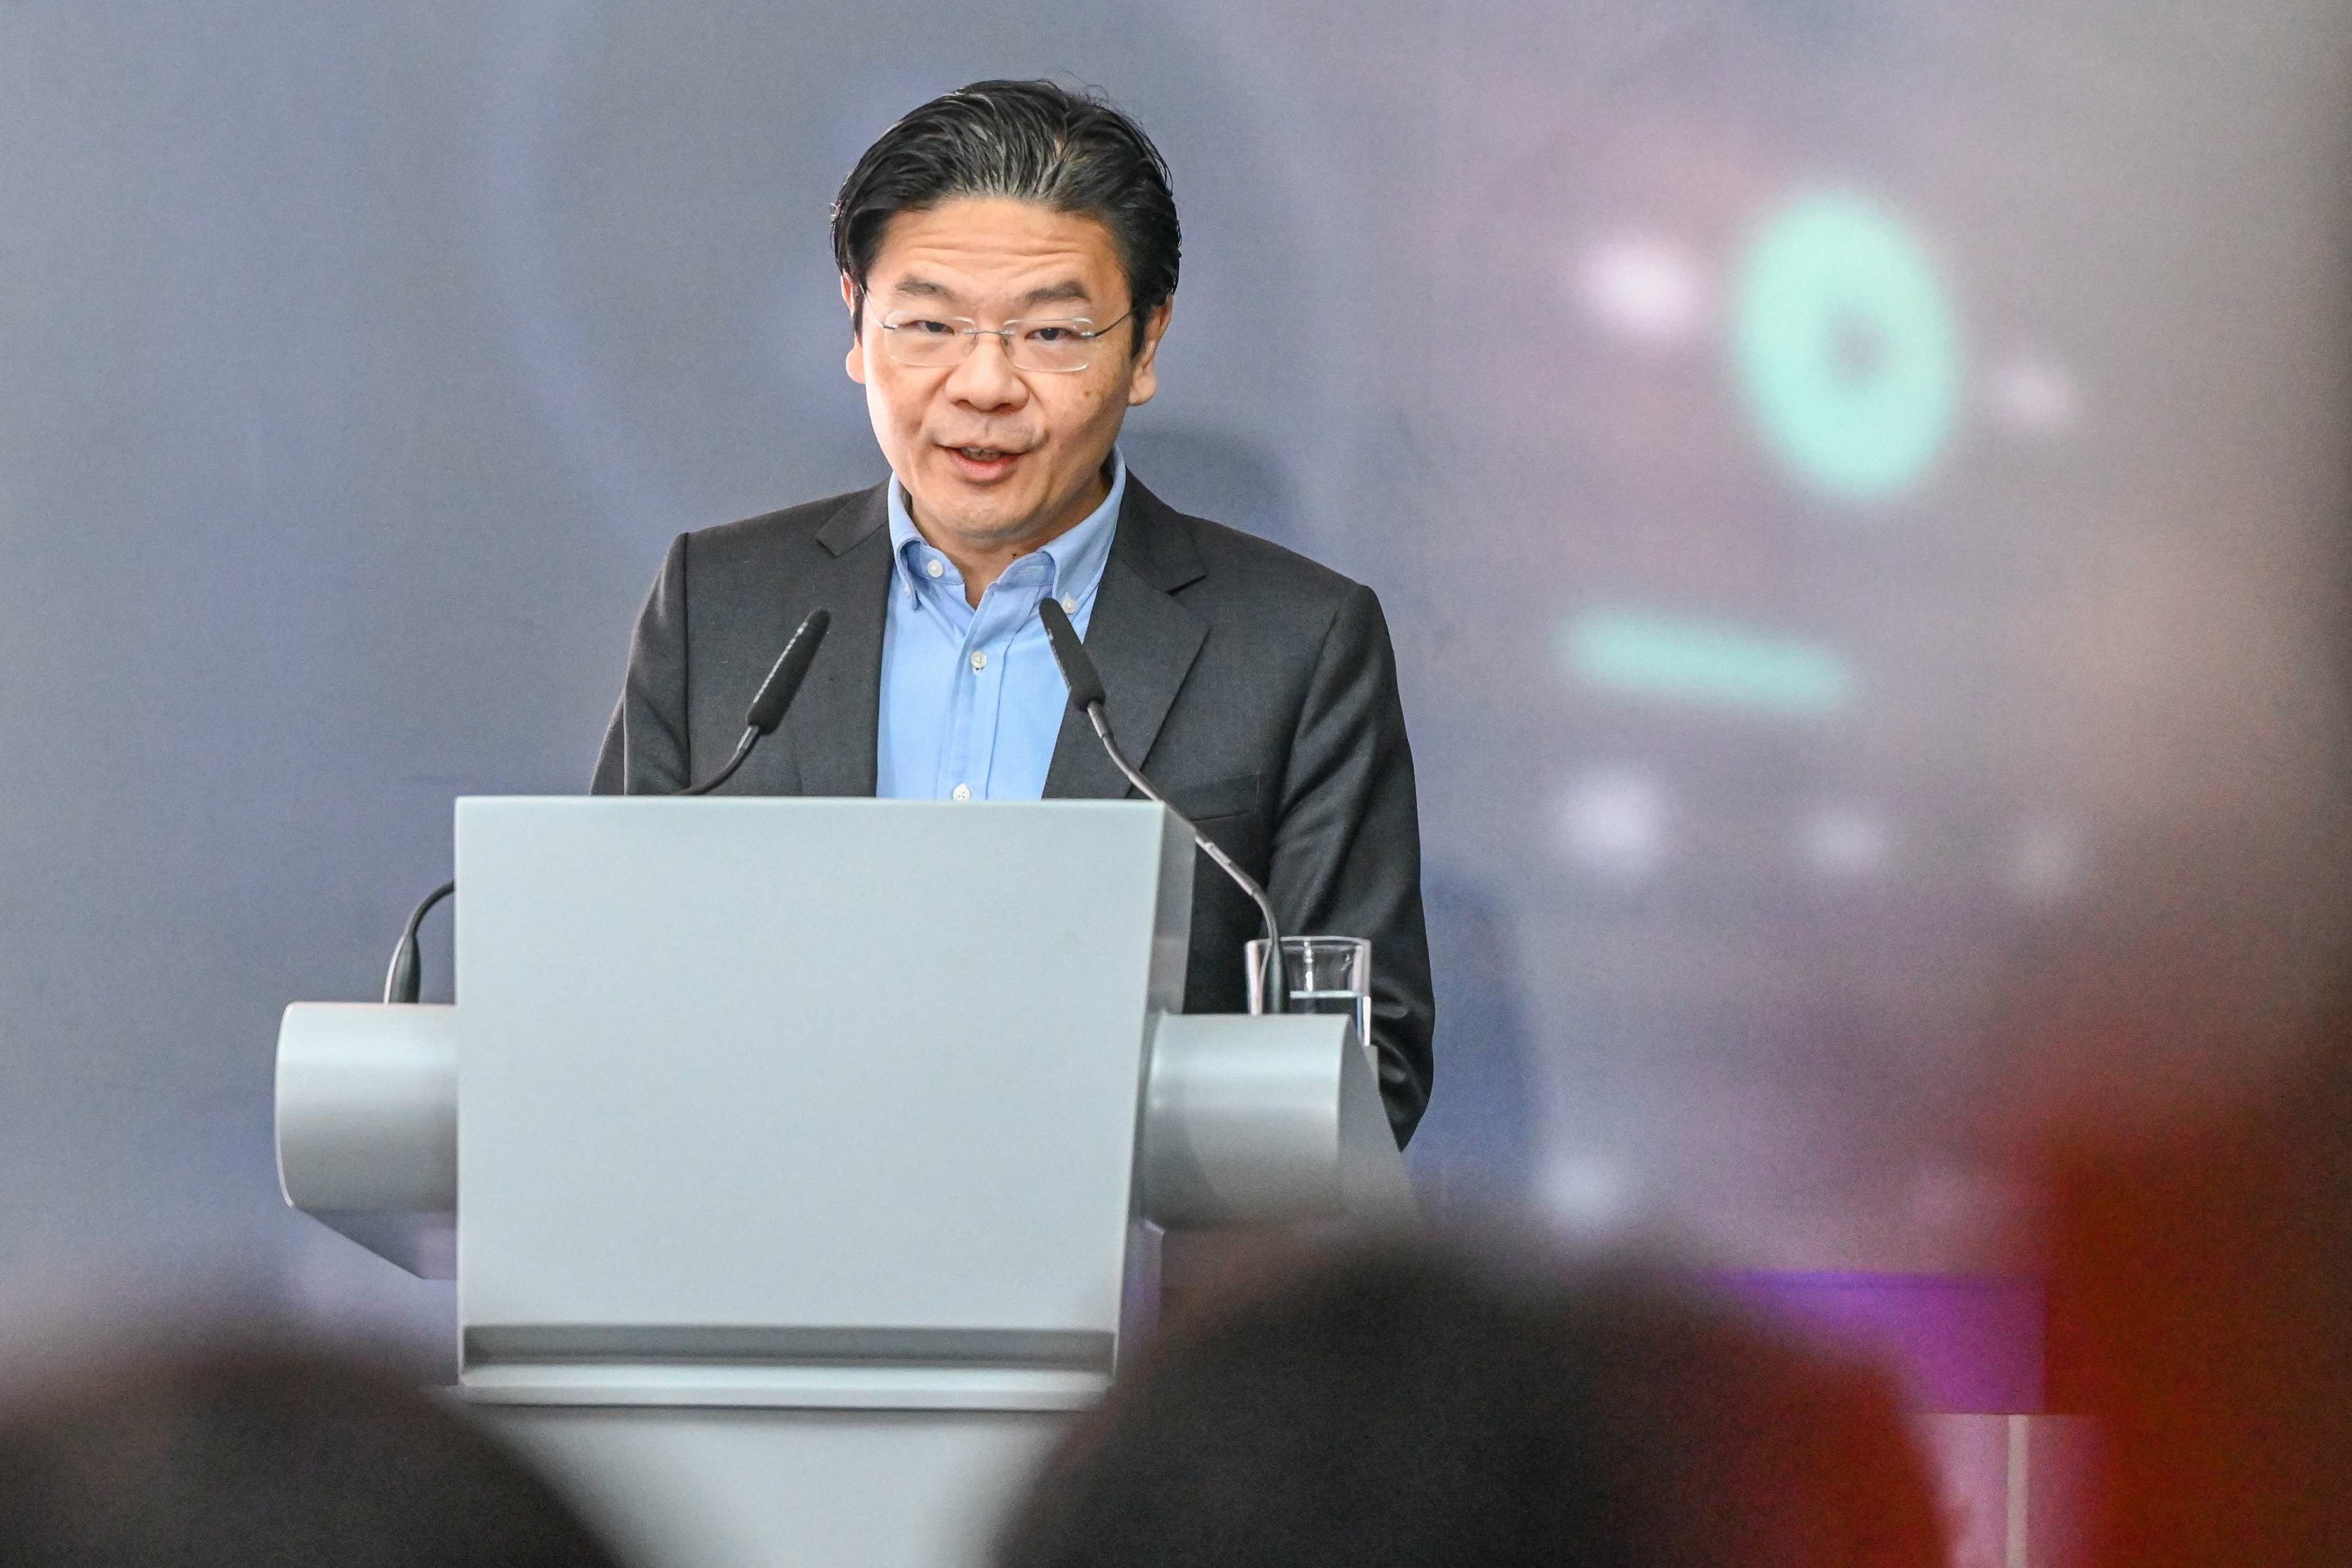 Singapore’s incoming Prime Minister Lawrence Wong delivers a speech last year. Photo: AFP